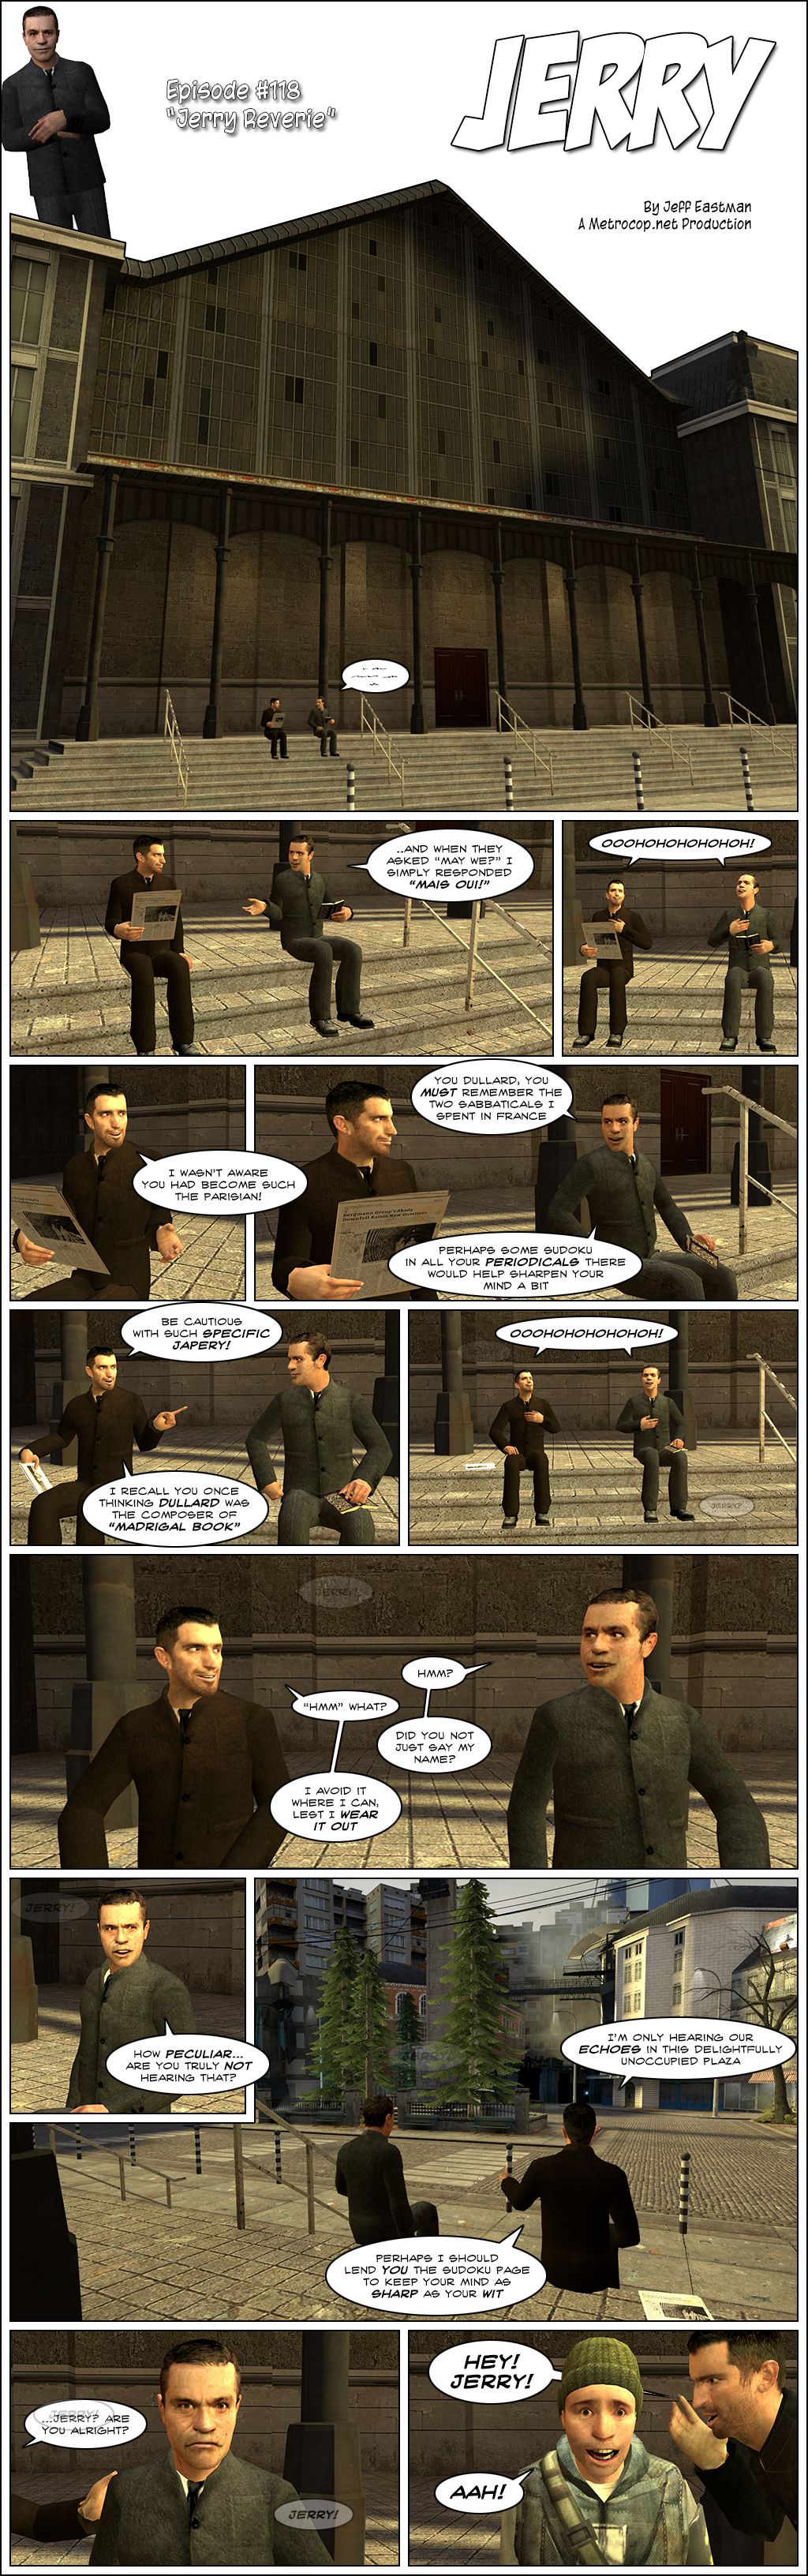 On a cleaned-up version of the City 17 train station plaza from Half-Life 2, a suited Jeff and Jerry are talking while sitting on the steps. Jerry delivers the punchline that when they asked may we, he simply responded mais oui. Both he and Jeff laugh snobbily, then Jeff tells Jerry he wasn't aware he had become such the Parisian. Jerry calls him a dullard and reminds him of the two sabbaticals he spent in France, then teases him that perhaps some sudoku in all his periodicals there would help sharpen his mind a bit. Jeff retorts to be cautious with such specific japery, as he recalls Jerry once thinking dullard was the composer of Madrigal Book. They crack in laughter again. Jerry then hears a faint voice calling out his name and asks hmm. Jeff replies hmm what. Jerry asks if he did not just say his name, to which Jeff says he avoids it where he can, lest he wear it out. Jerry once again hears his name and calls it peculiar, then asks Jeff if he is truly not hearing that. Jeff says he's only hearing their echoes in this delightfully unoccupied plaza. We then see that the City 17 plaza has beautiful large trees where Combine equipment would usually be seen. Jeff suggests he should lend Jerry the sudoku page to keep his mind as sharp as his wit. Jerry frowns as the voice continues to call out to him, as Jeff puts his hand on his arm and asks if he is alright. Suddenly, the normal Jeff screams in Jerry's ear. Jerry, wearing his usual rebel outfit, screams in terror.